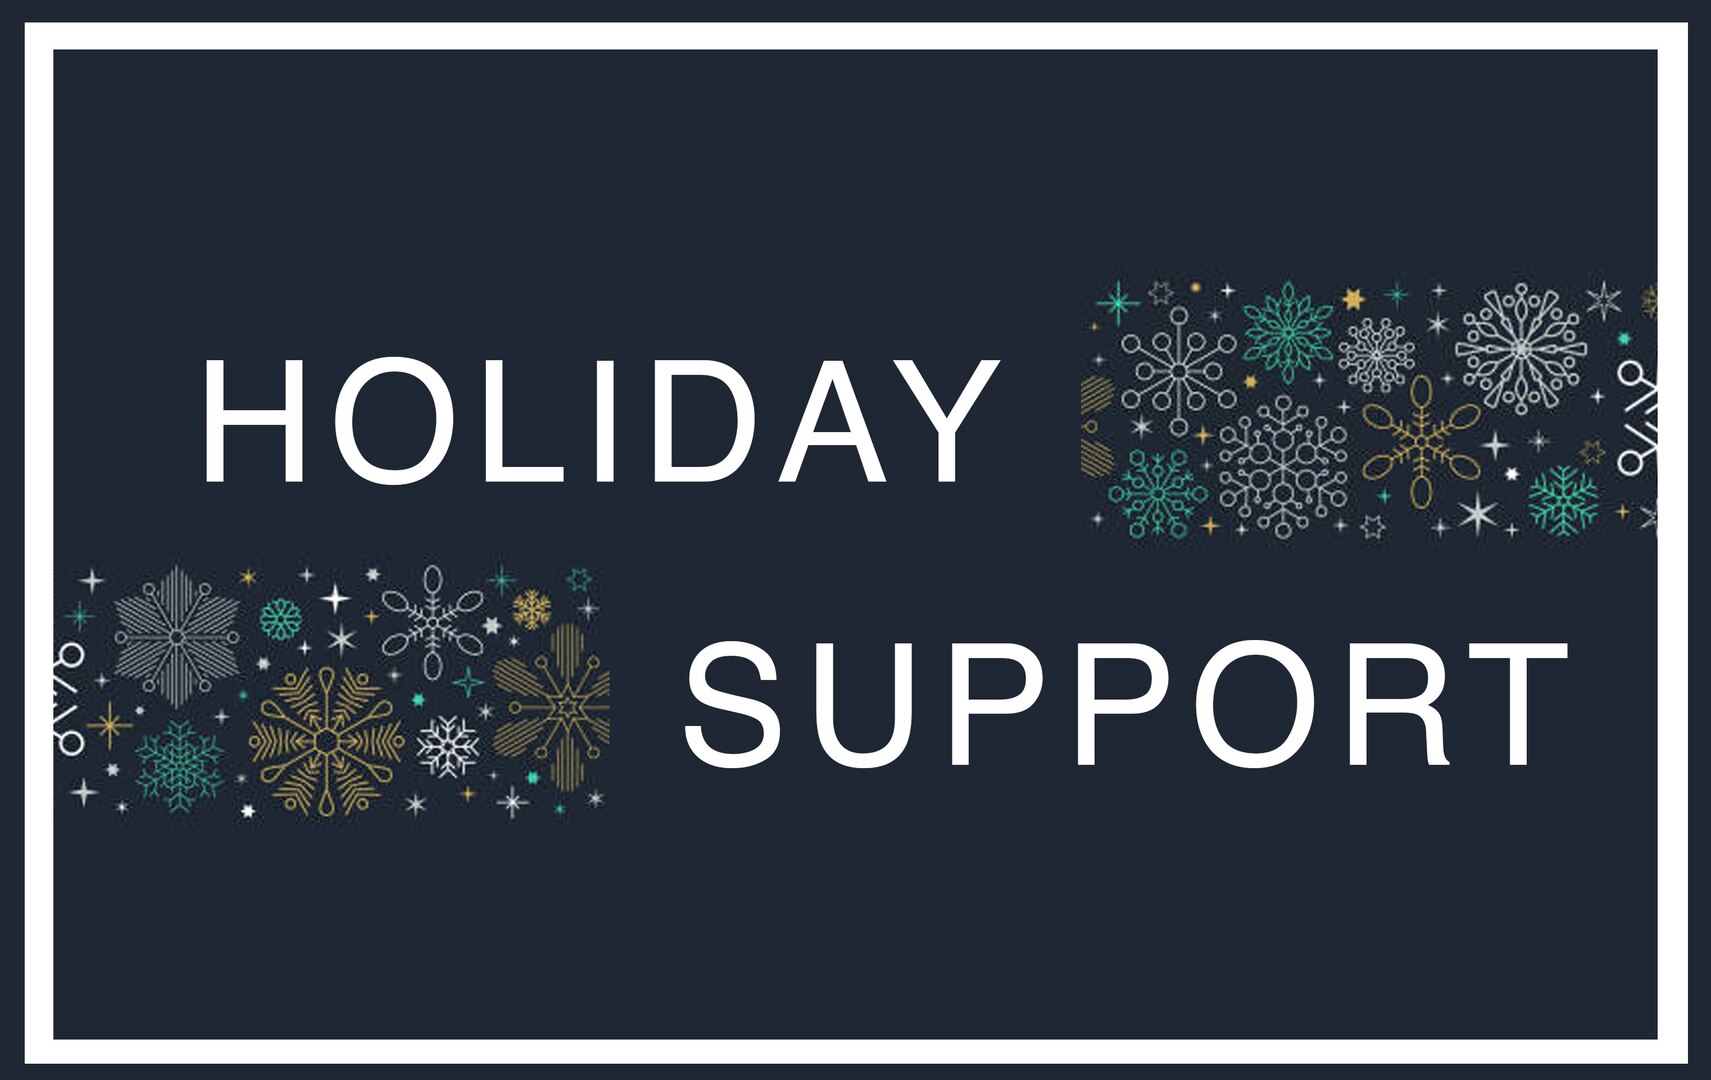 Holiday Support graphic